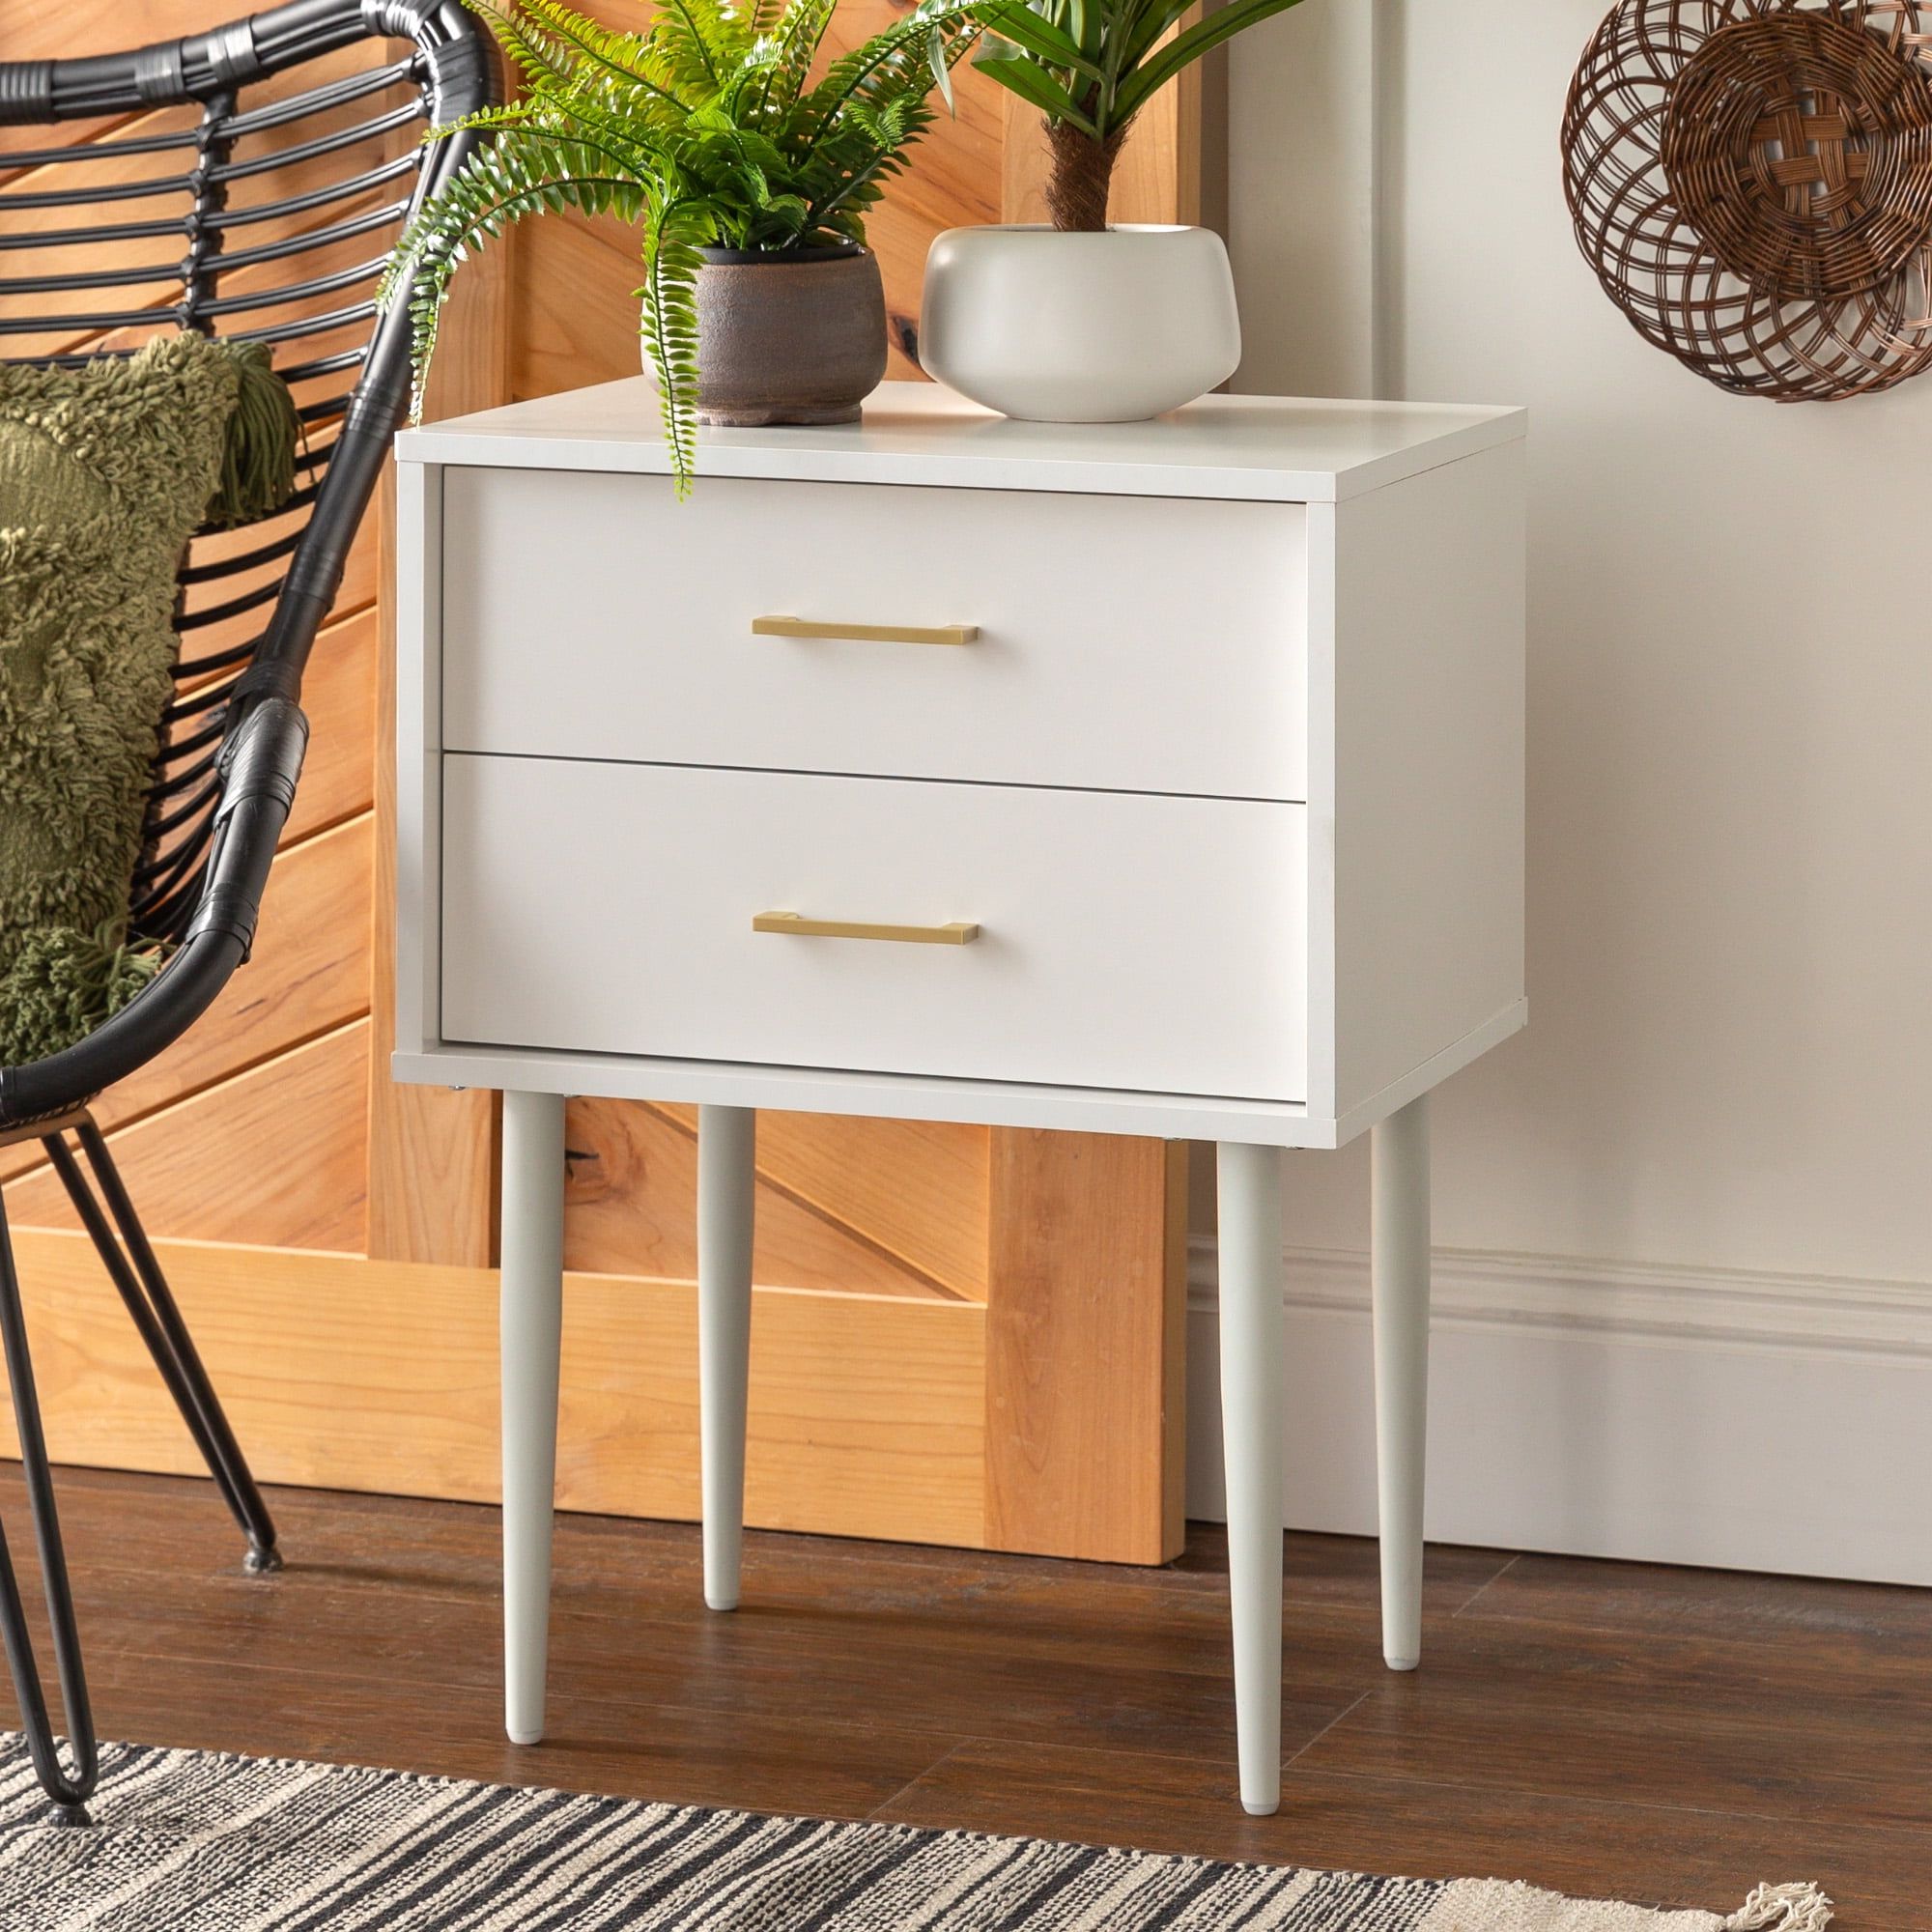 Manor Park Mid Century Modern Two Drawer End Table, White – Walmart With Regard To Best And Newest Freestanding Tables With Drawers (View 12 of 15)